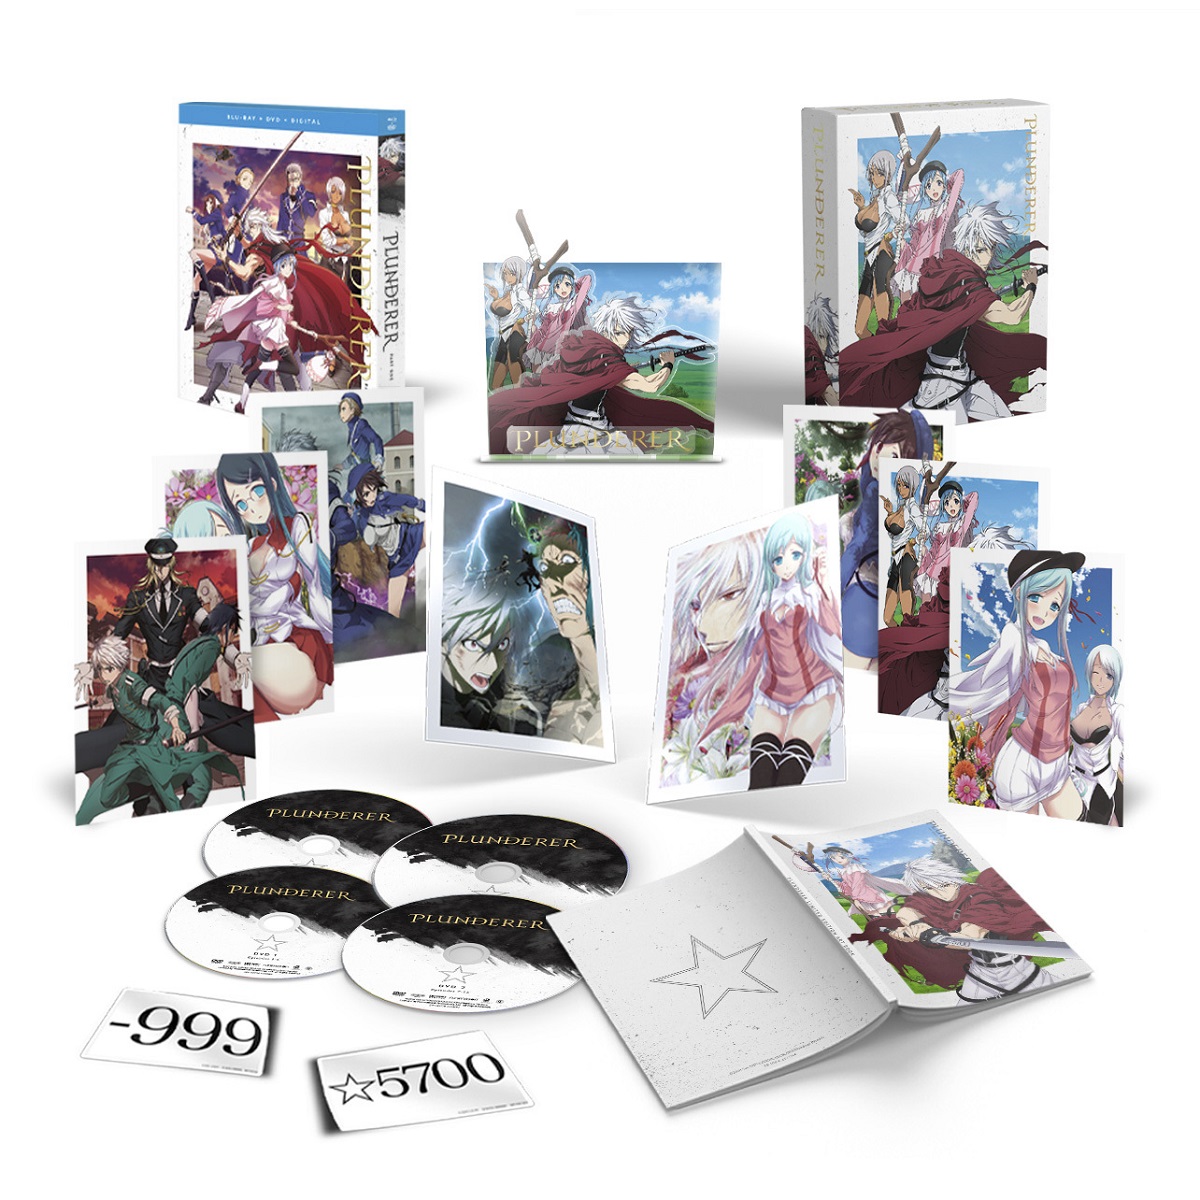 Plunderer Parts 1 & 2 (Limited Edition Blu-ray & DVD) Unboxing